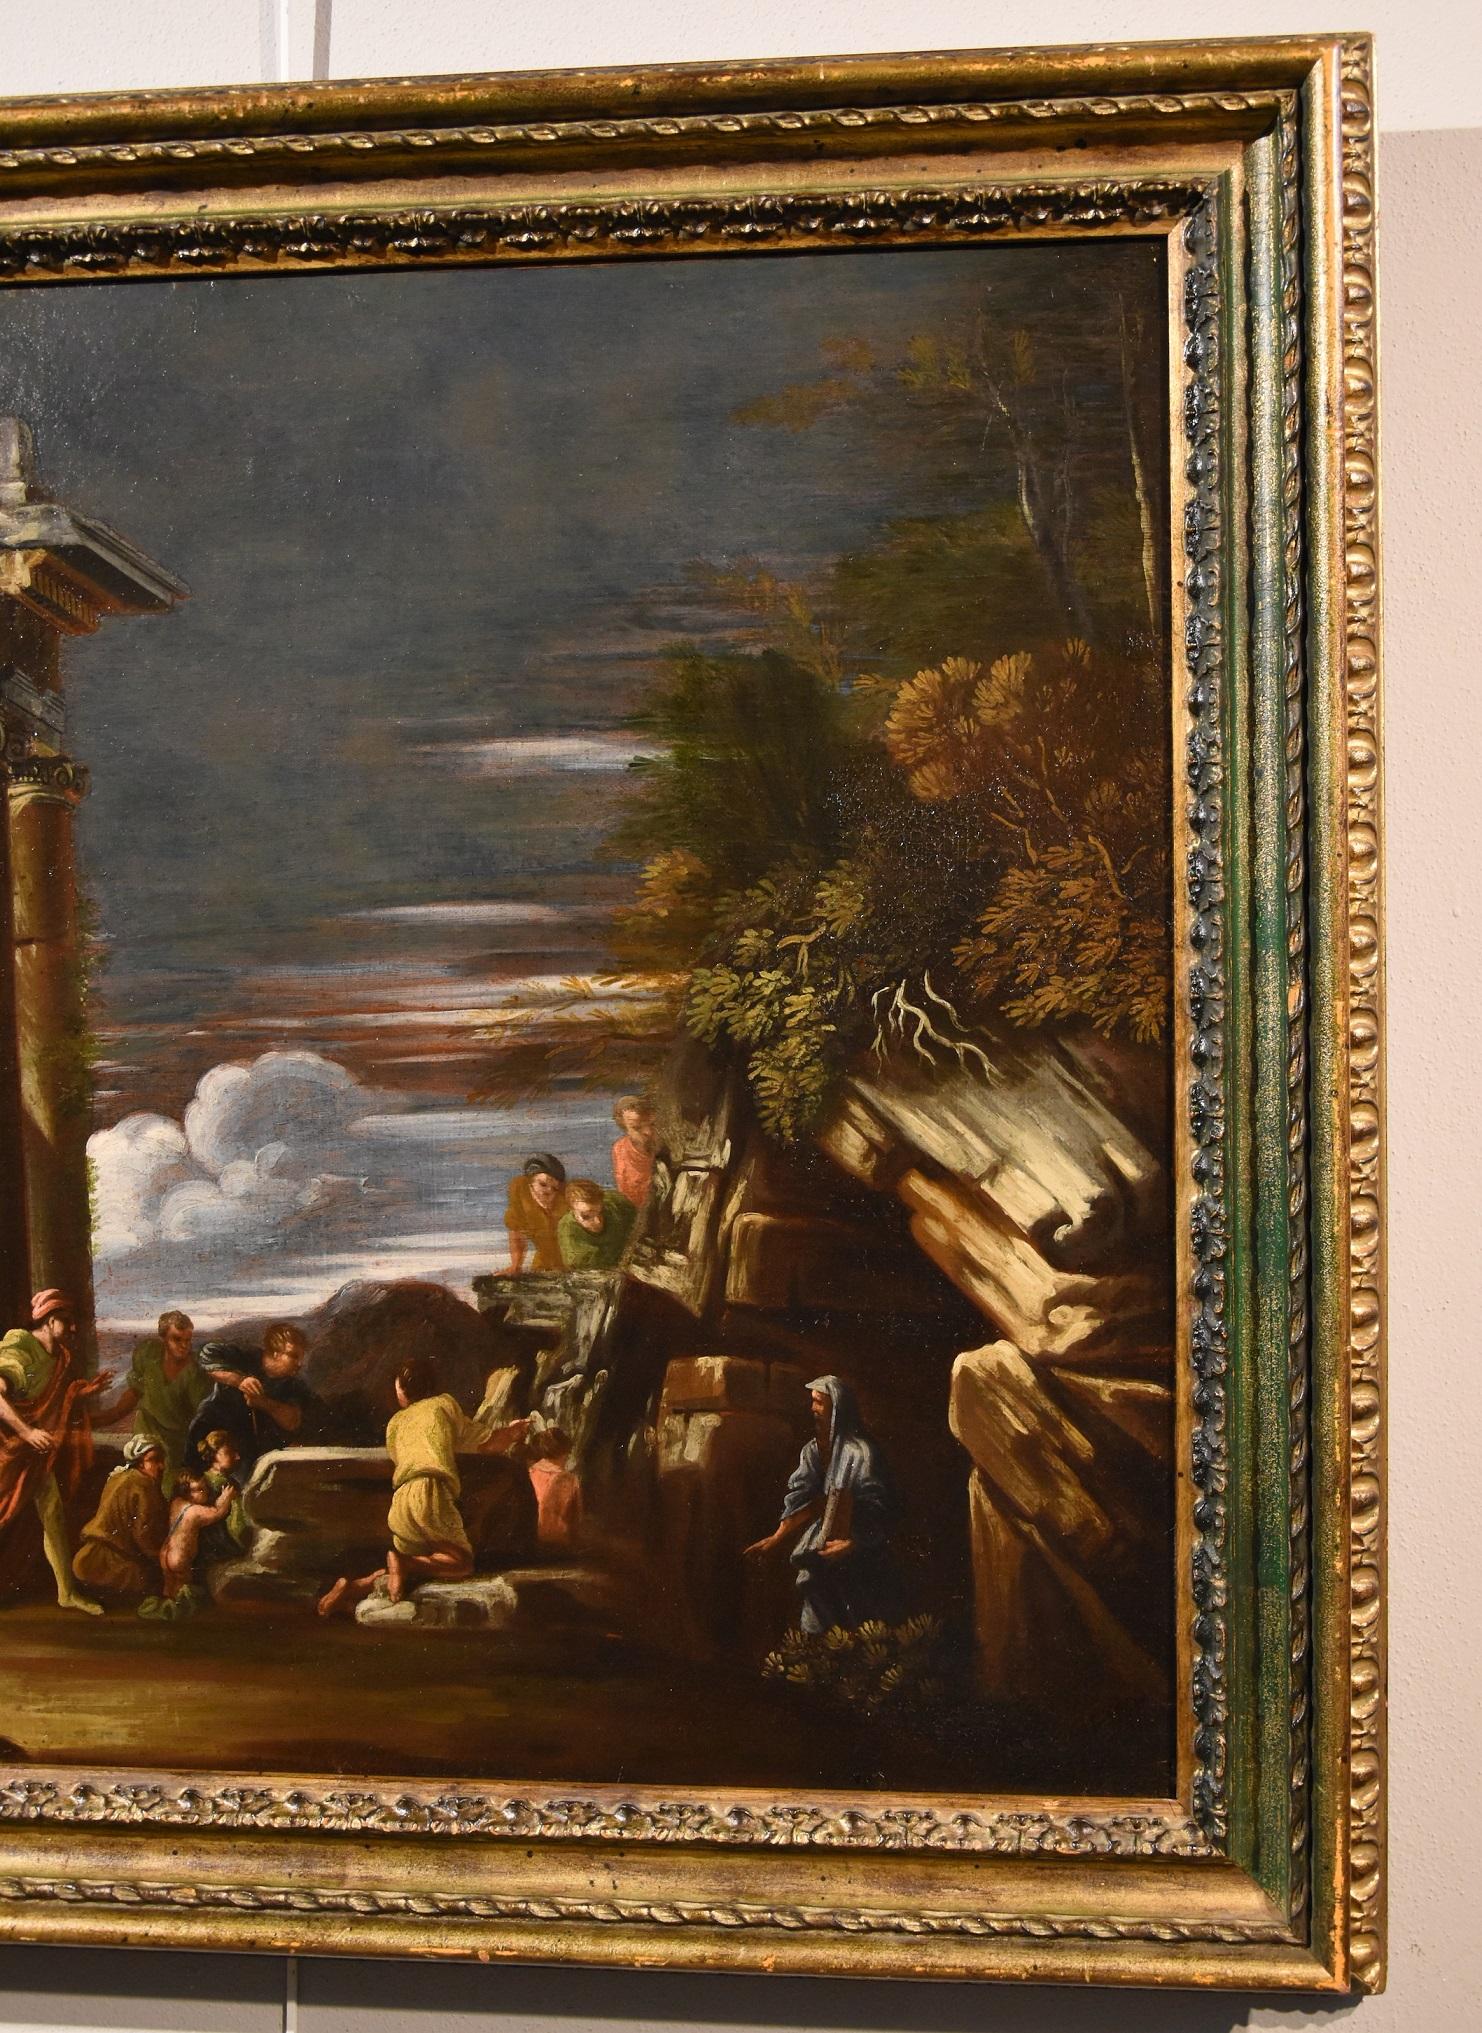 Giovani Ghisolfi (Milan 1623-1683), attributed / workshop
View of classical architectural ruins with Pythagoras pretending to return from Hades

Oil on canvas, cm. 70 x 84
In frame cm. 86 x 100

The painting in question, depicting an architectural